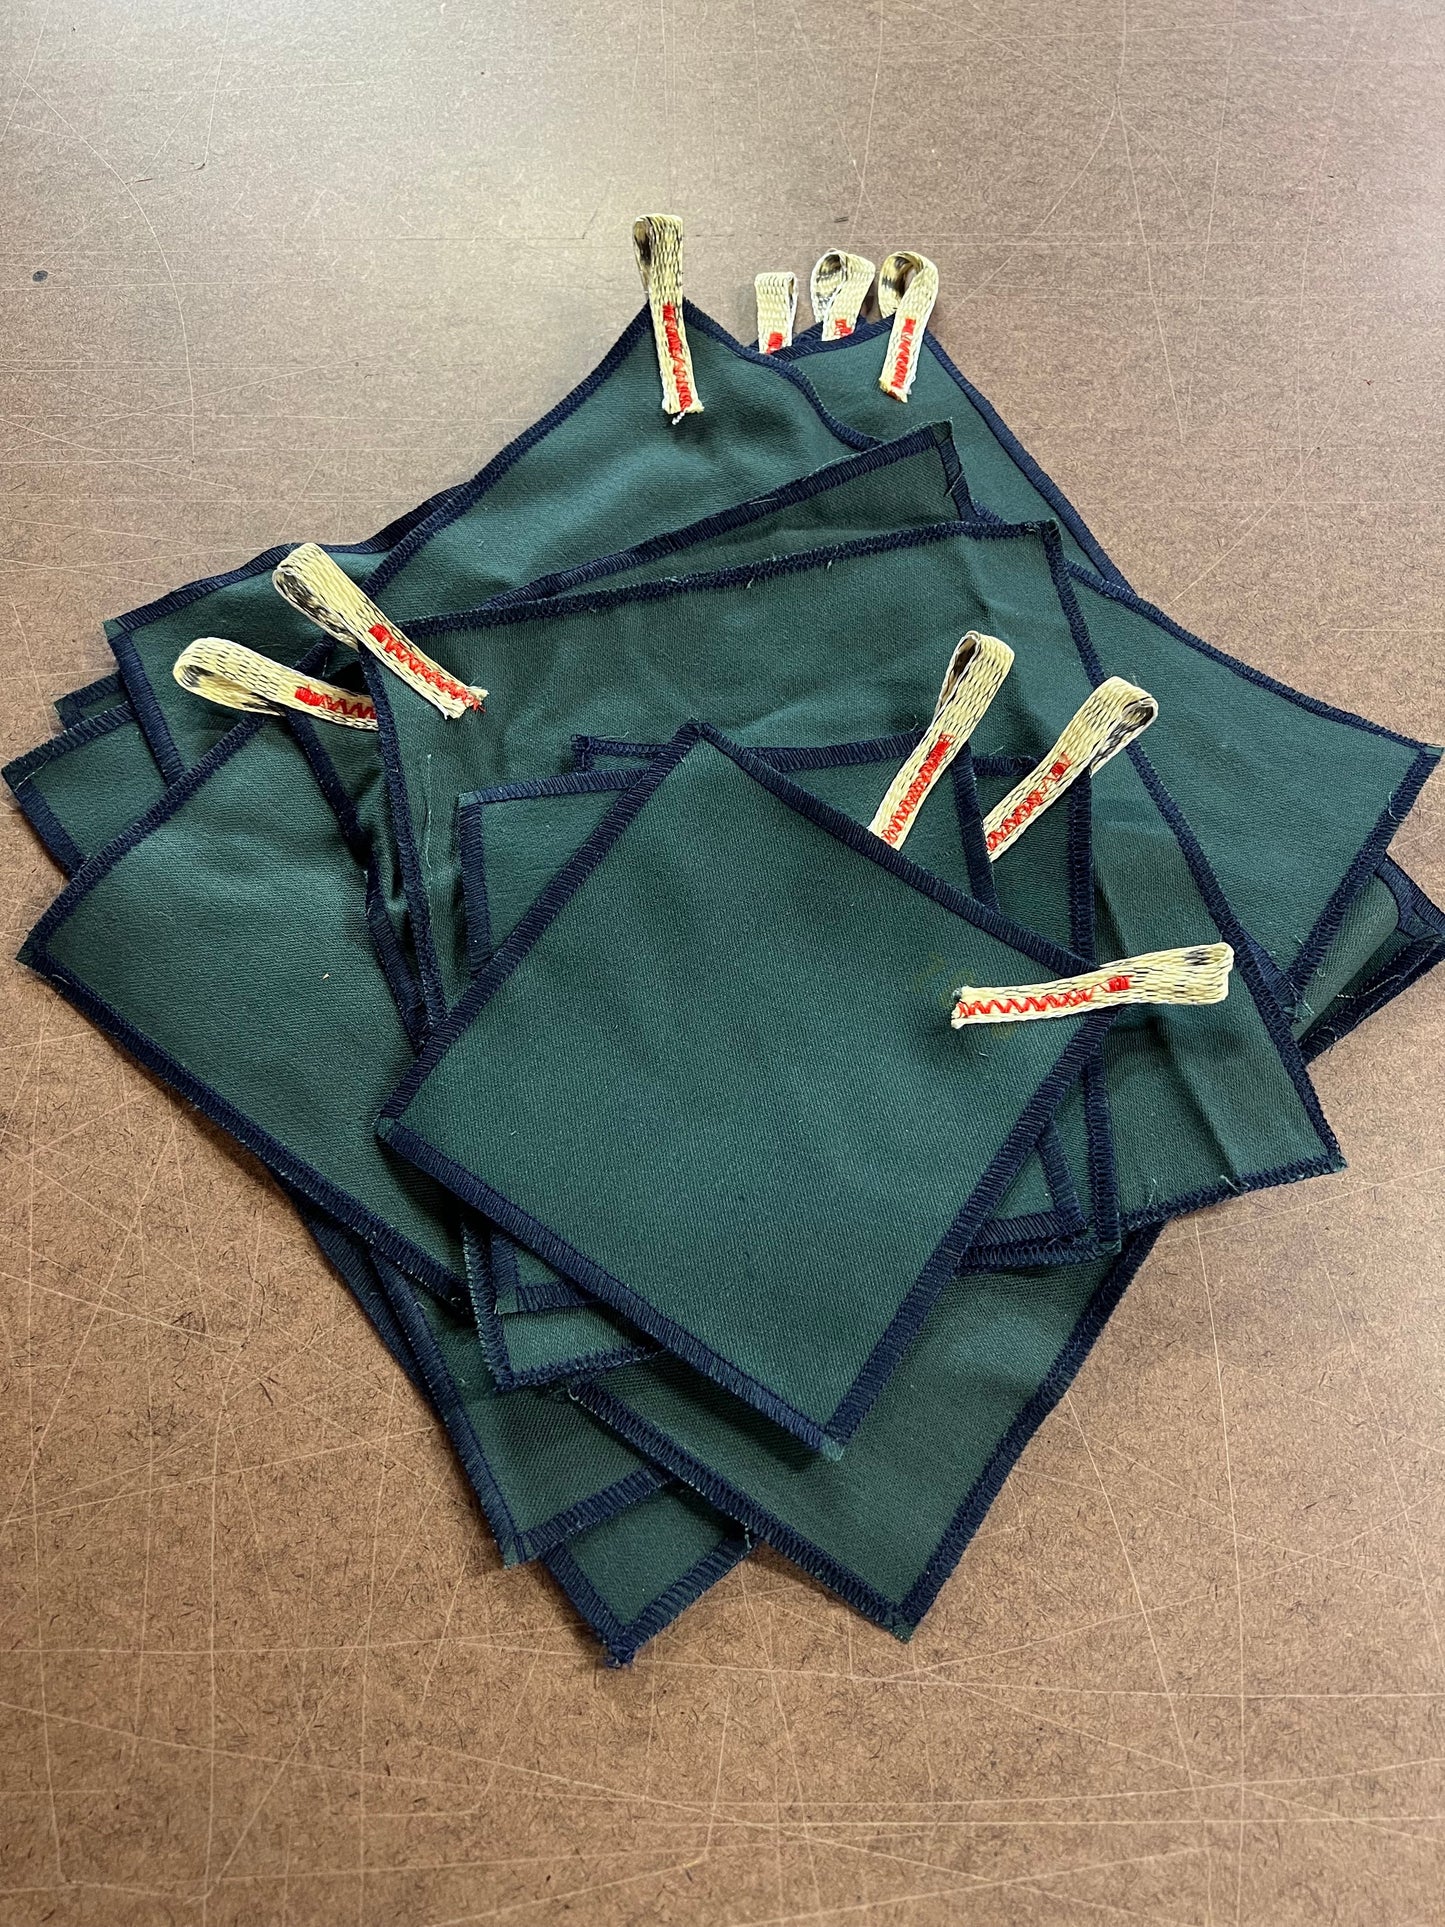 30x30 Nomex Fire Blanket